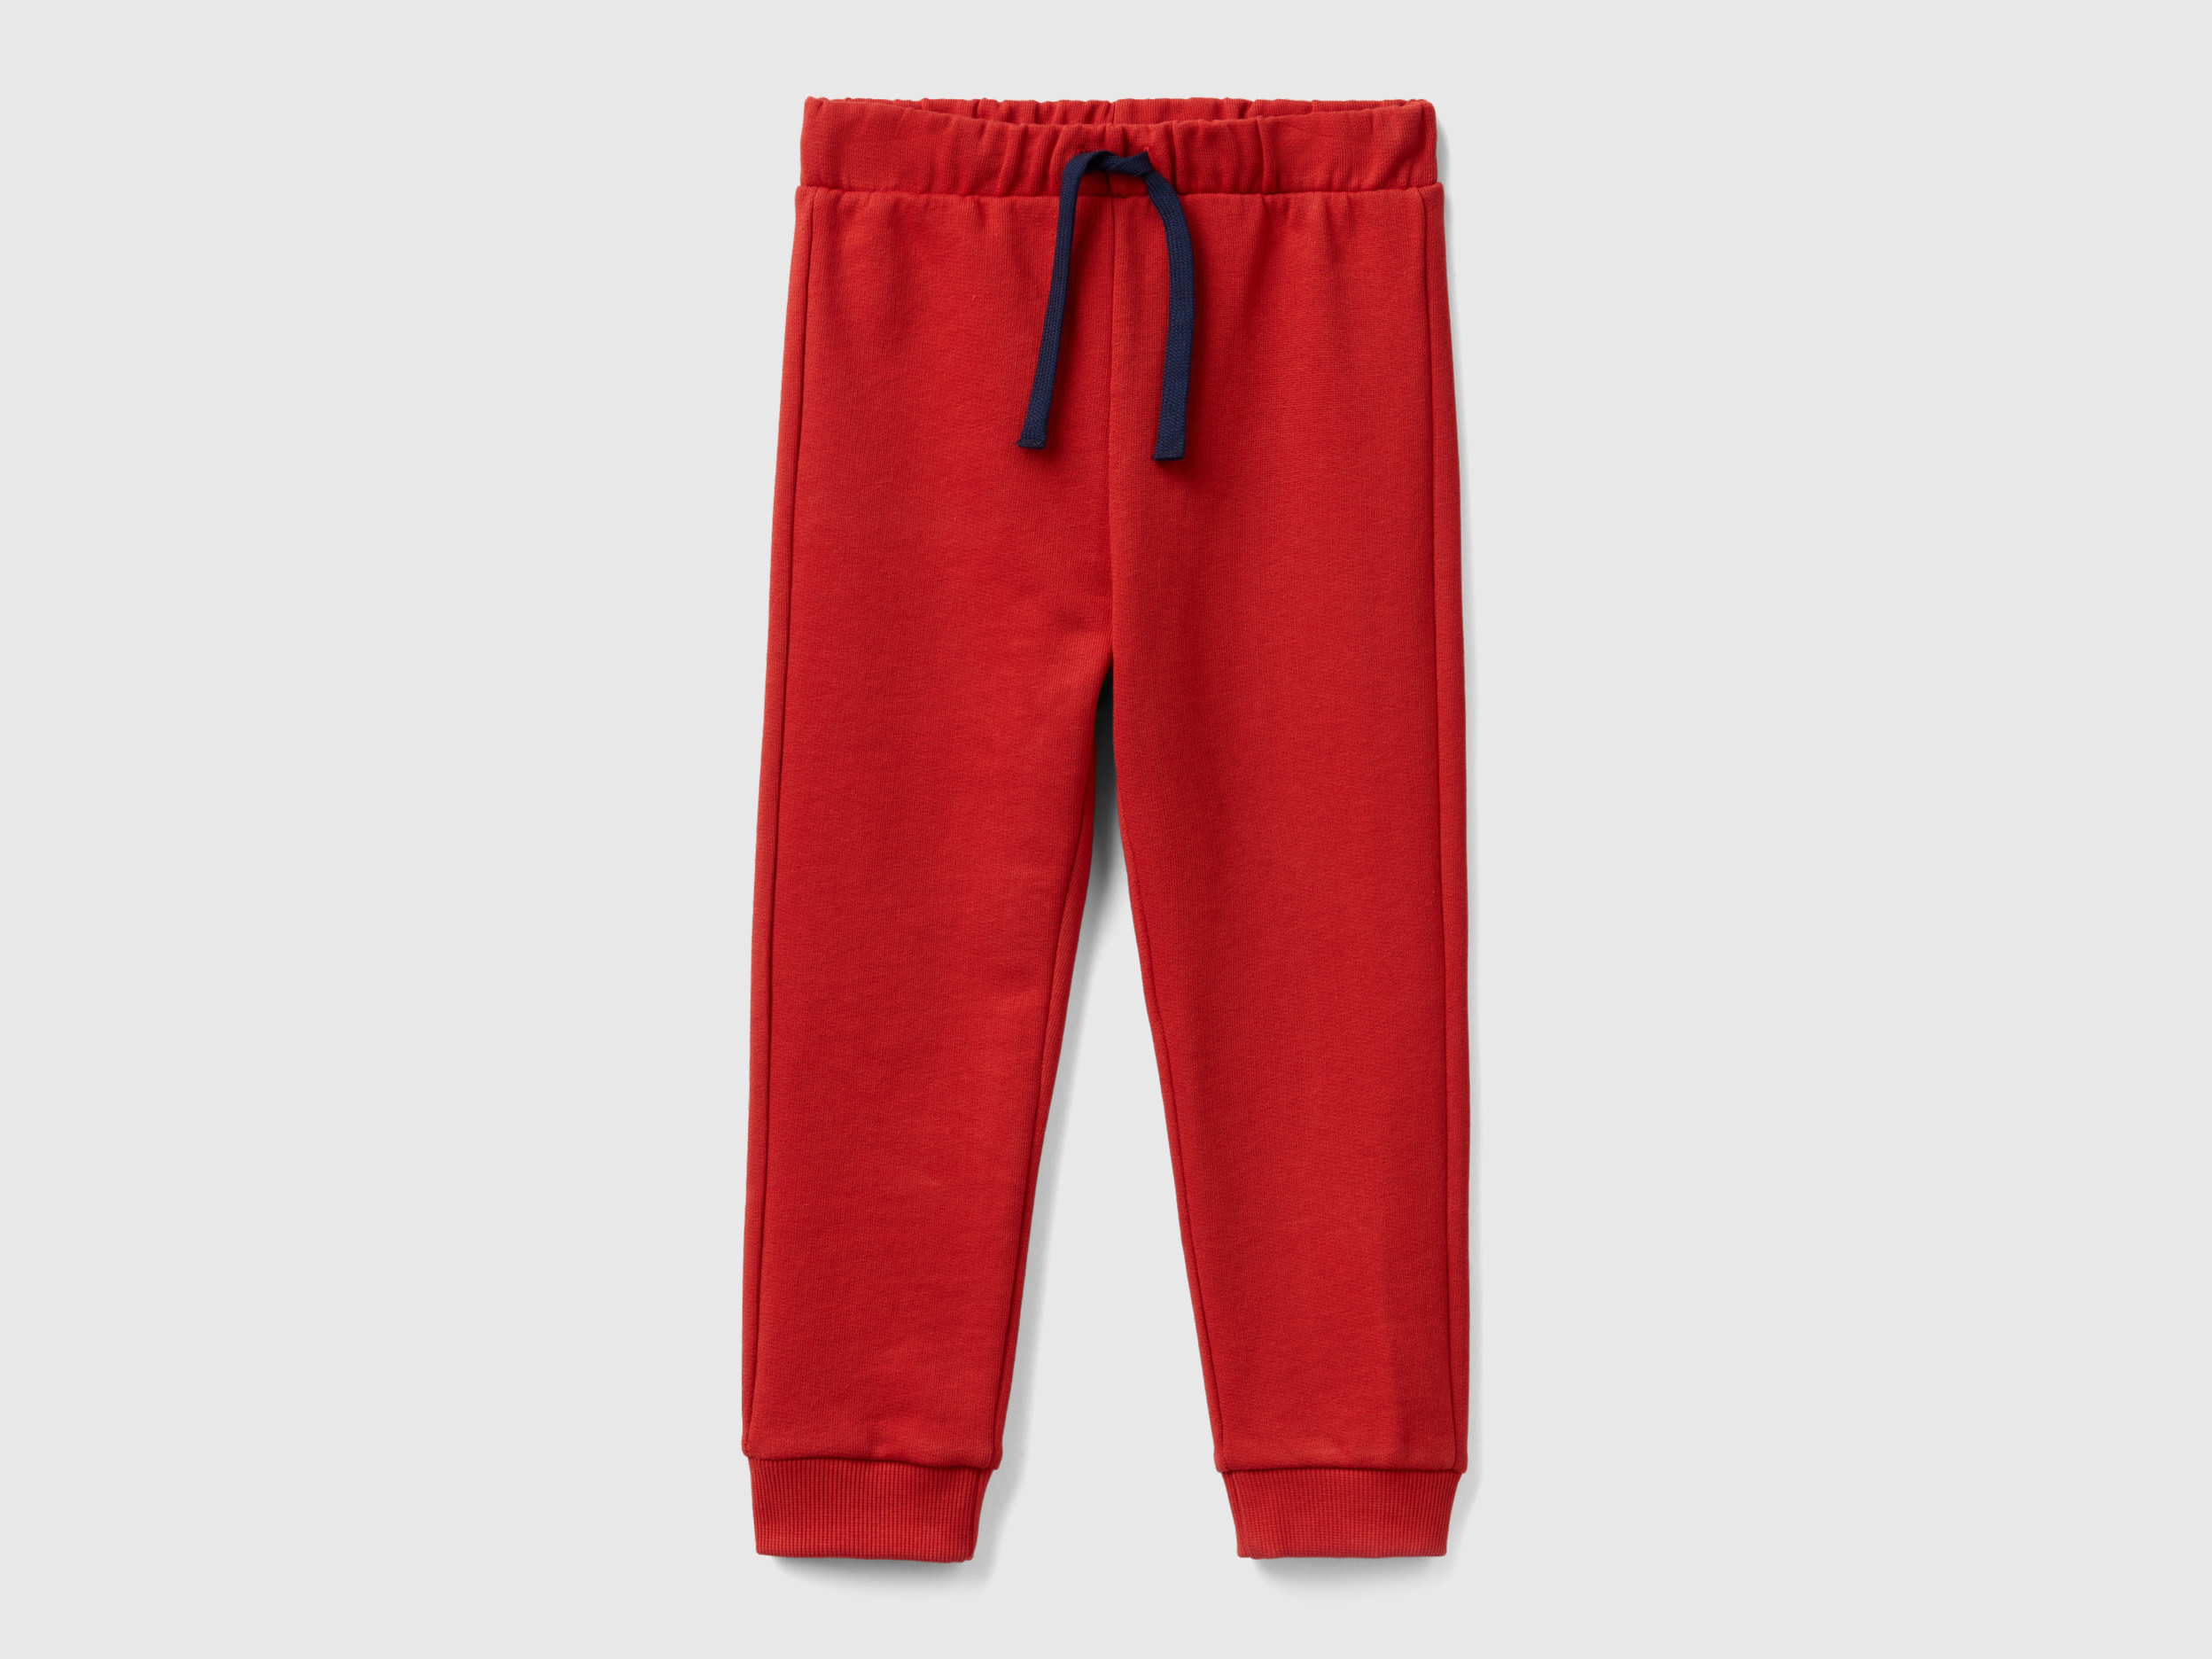 Image of Benetton, Sweatpants With Pocket, size 110, Brick Red, Kids